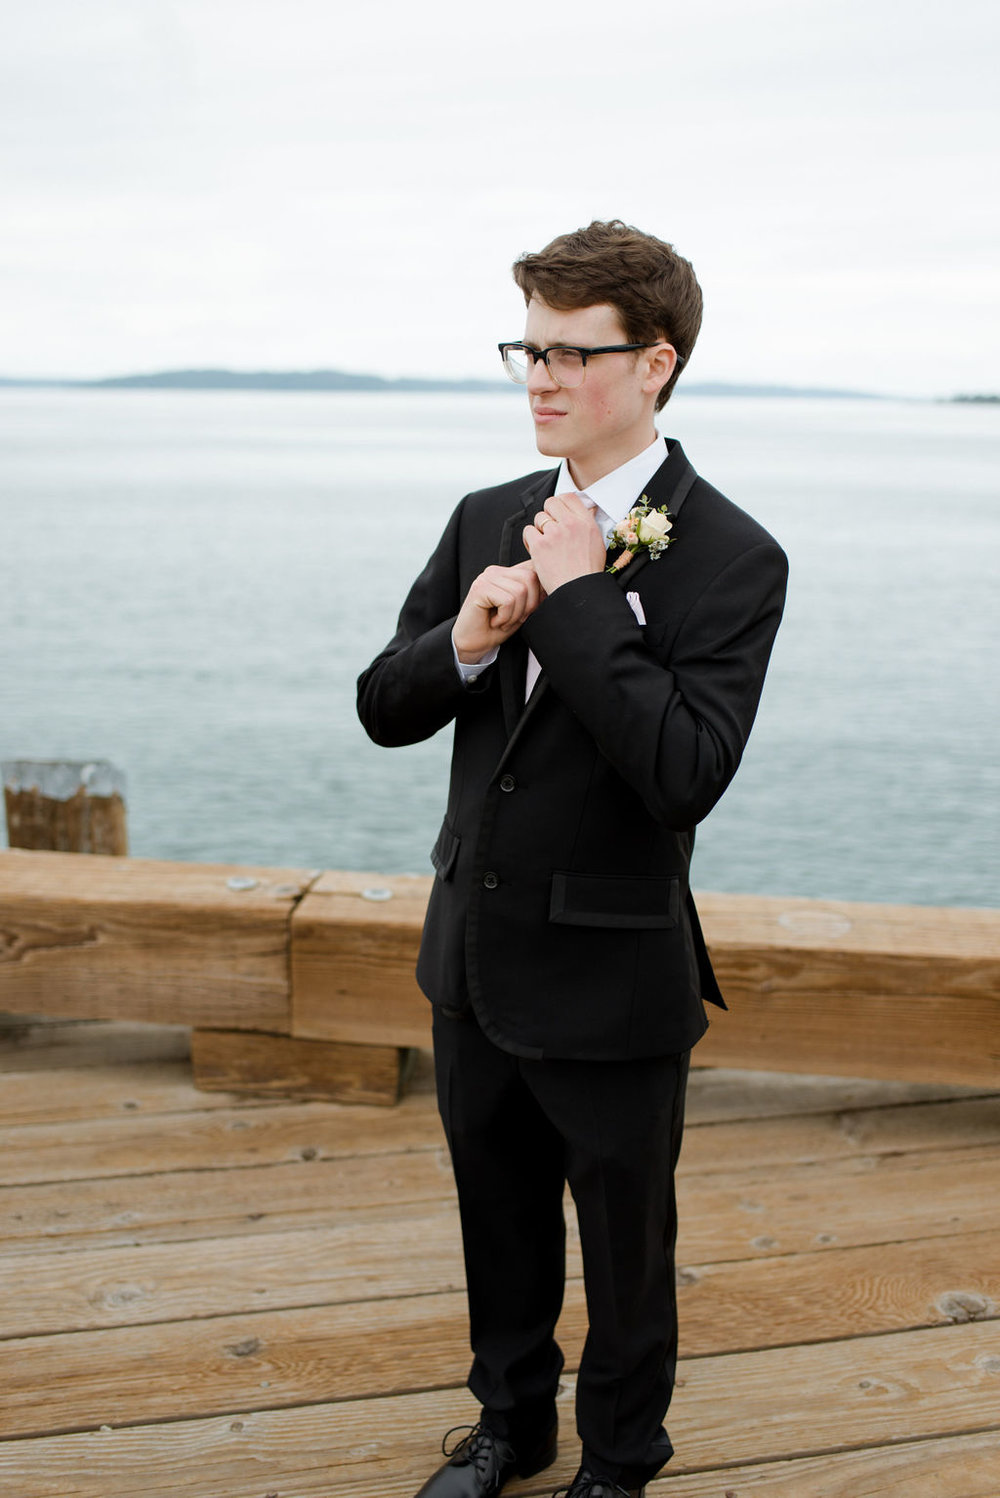 Groom at Old Town Dock